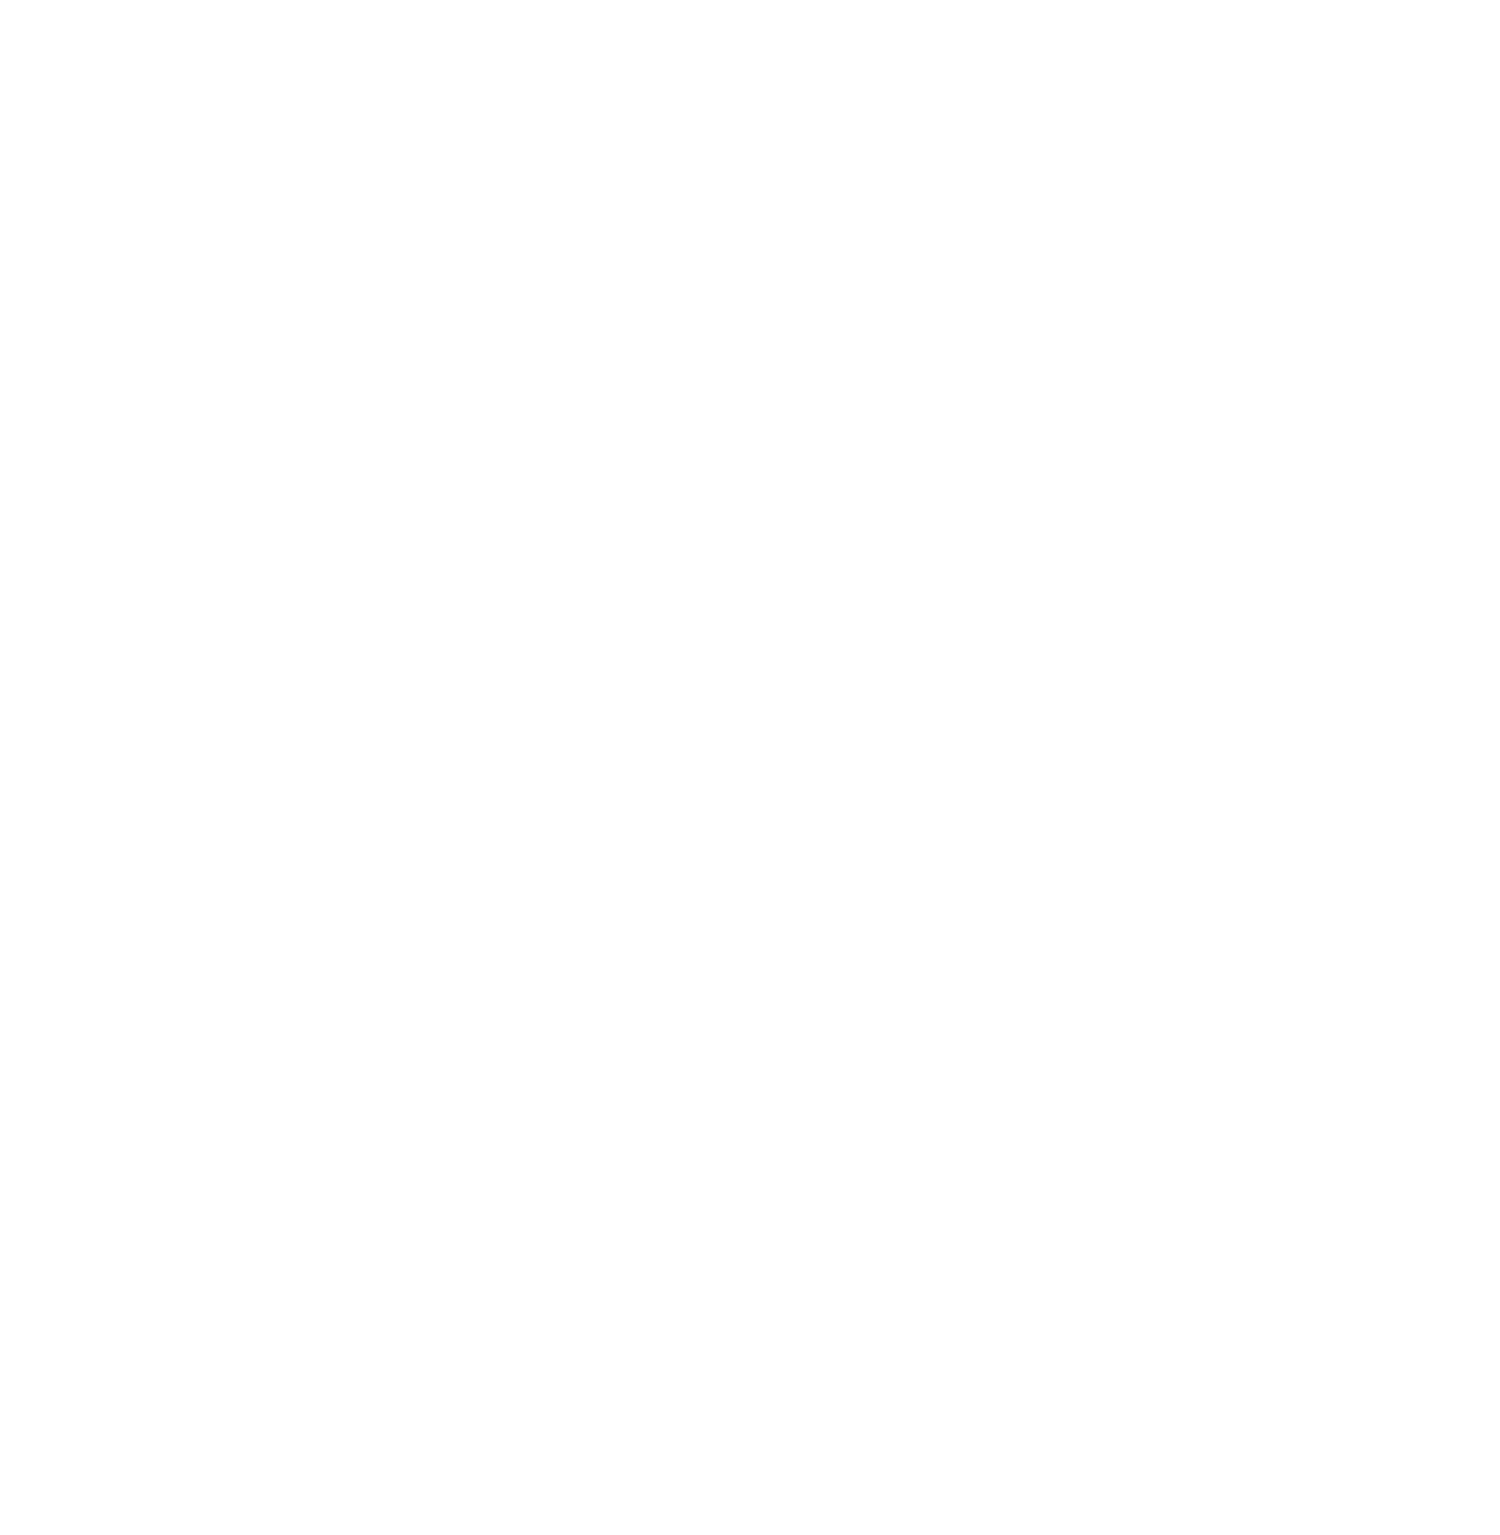 On the Road For Good